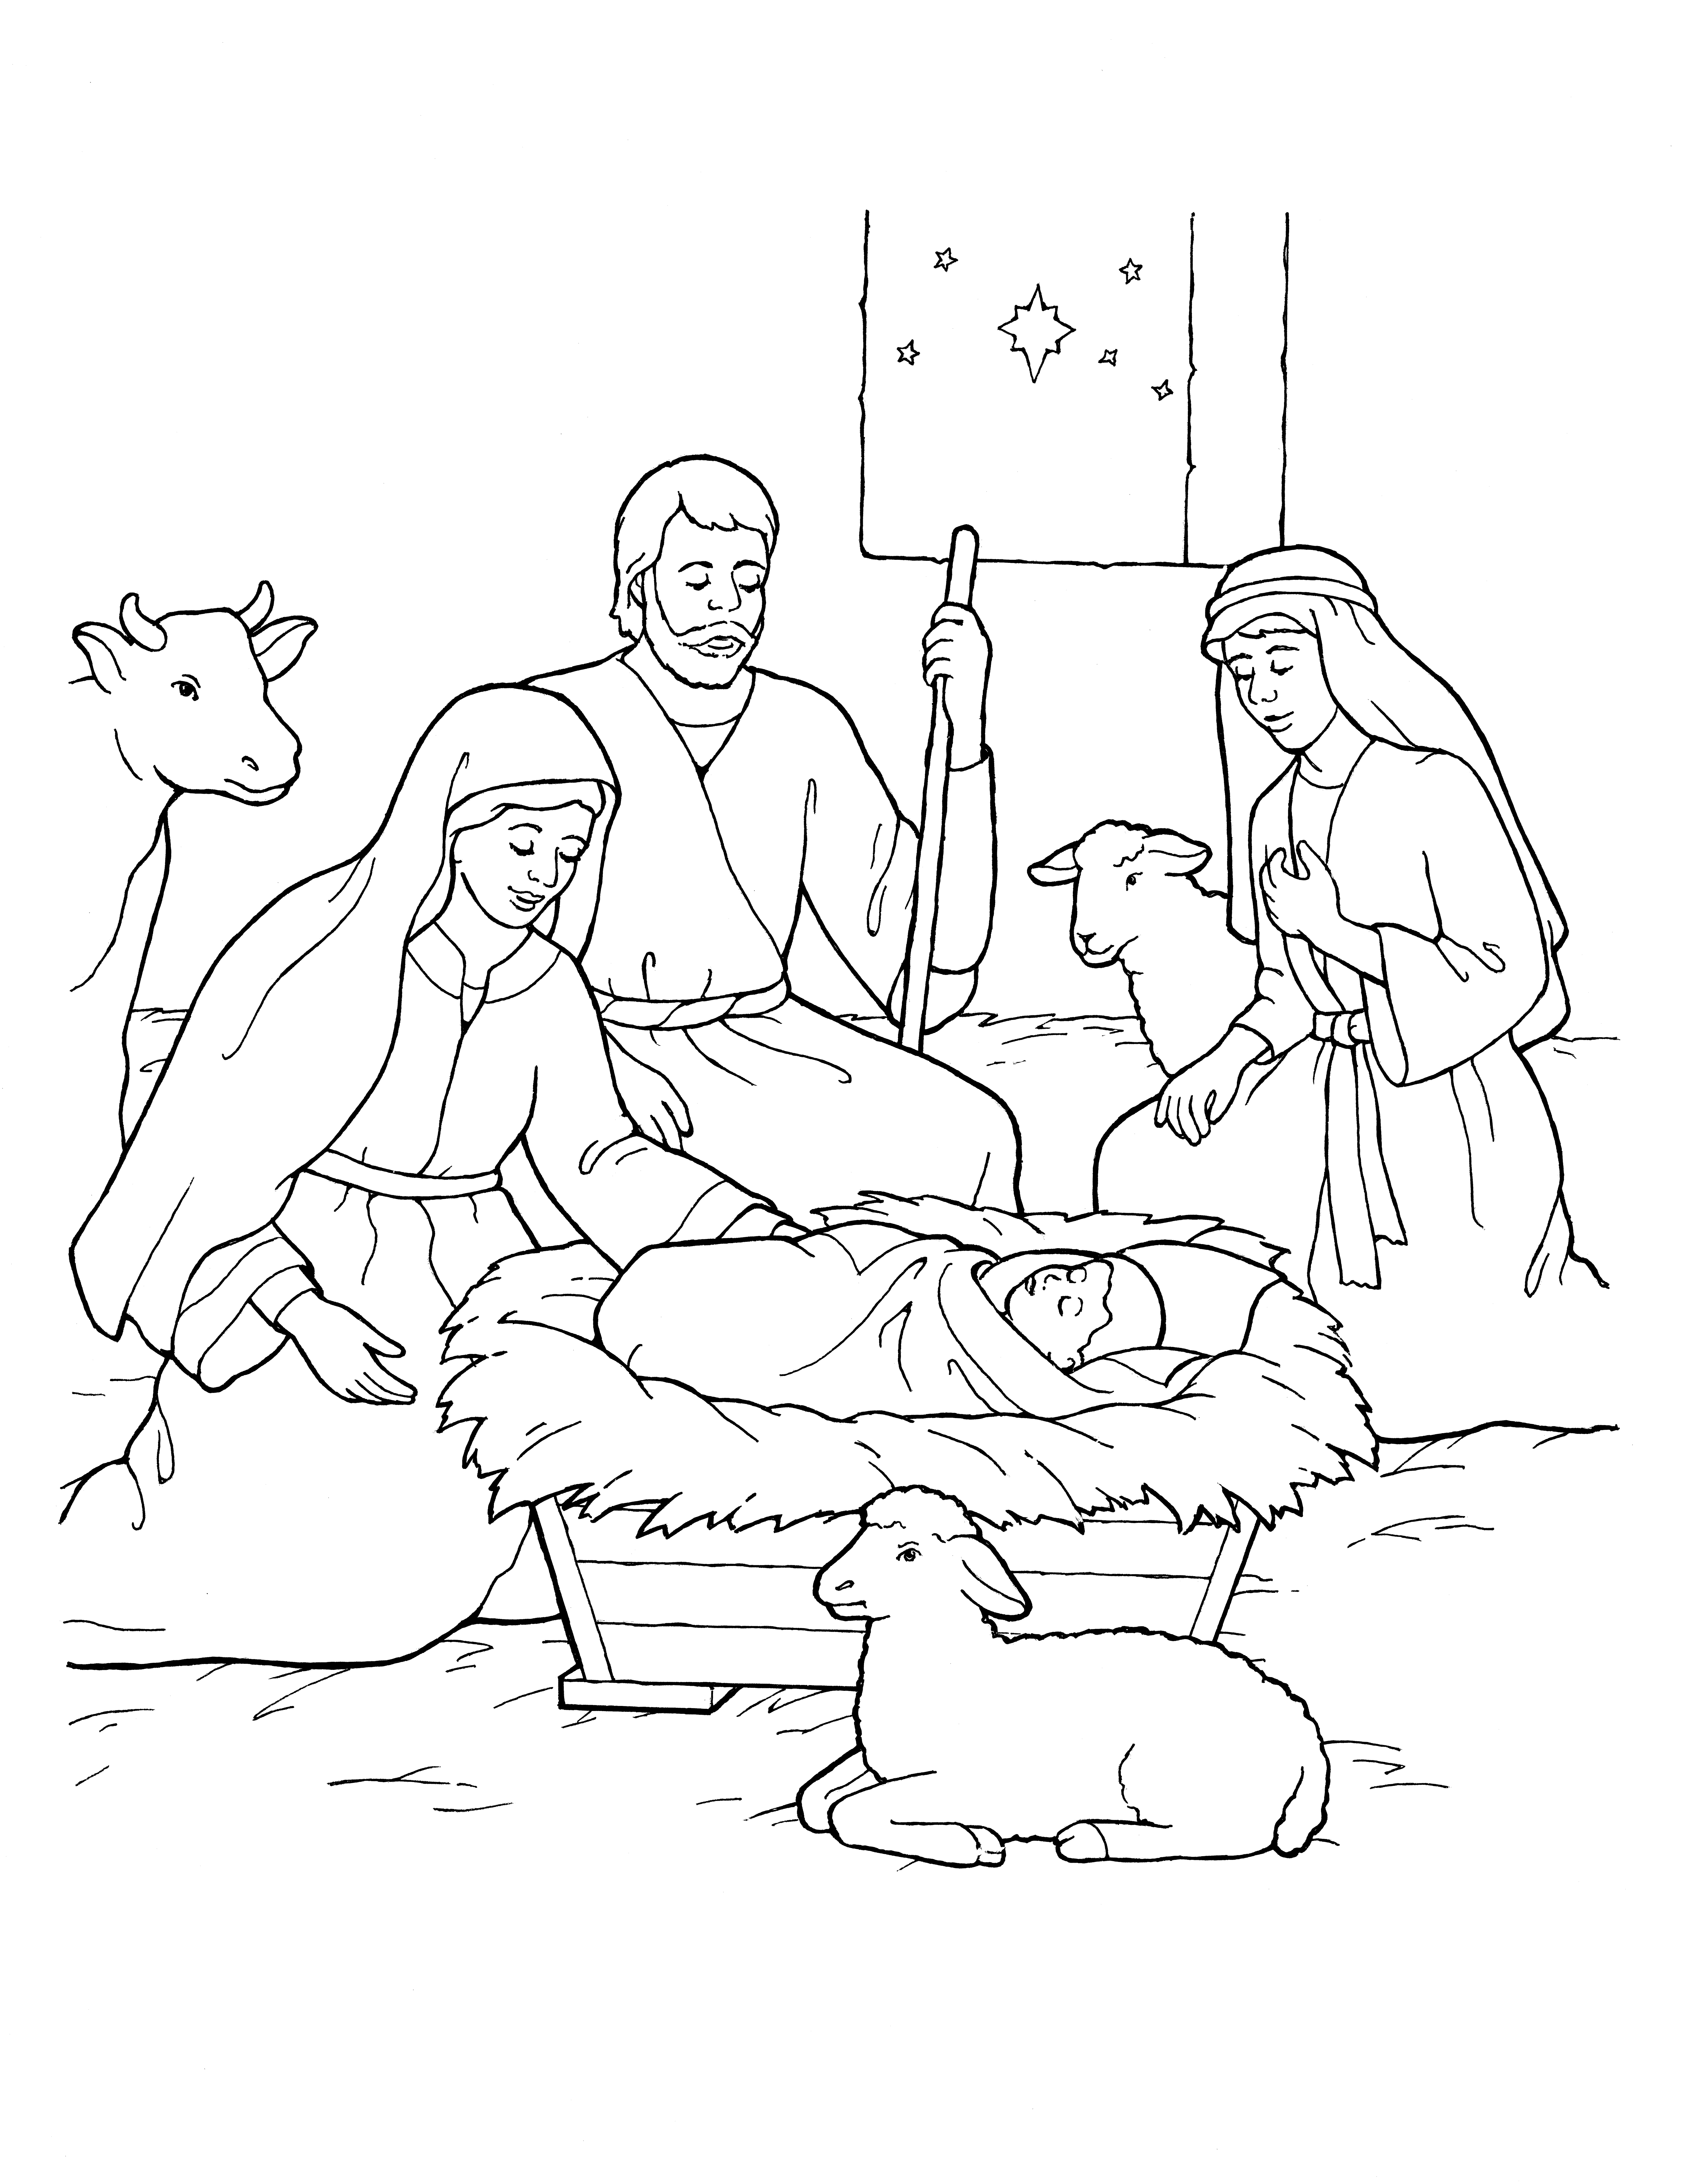 A line drawing of the Nativity, showing Mary, Joseph, Jesus, and the shepherds.